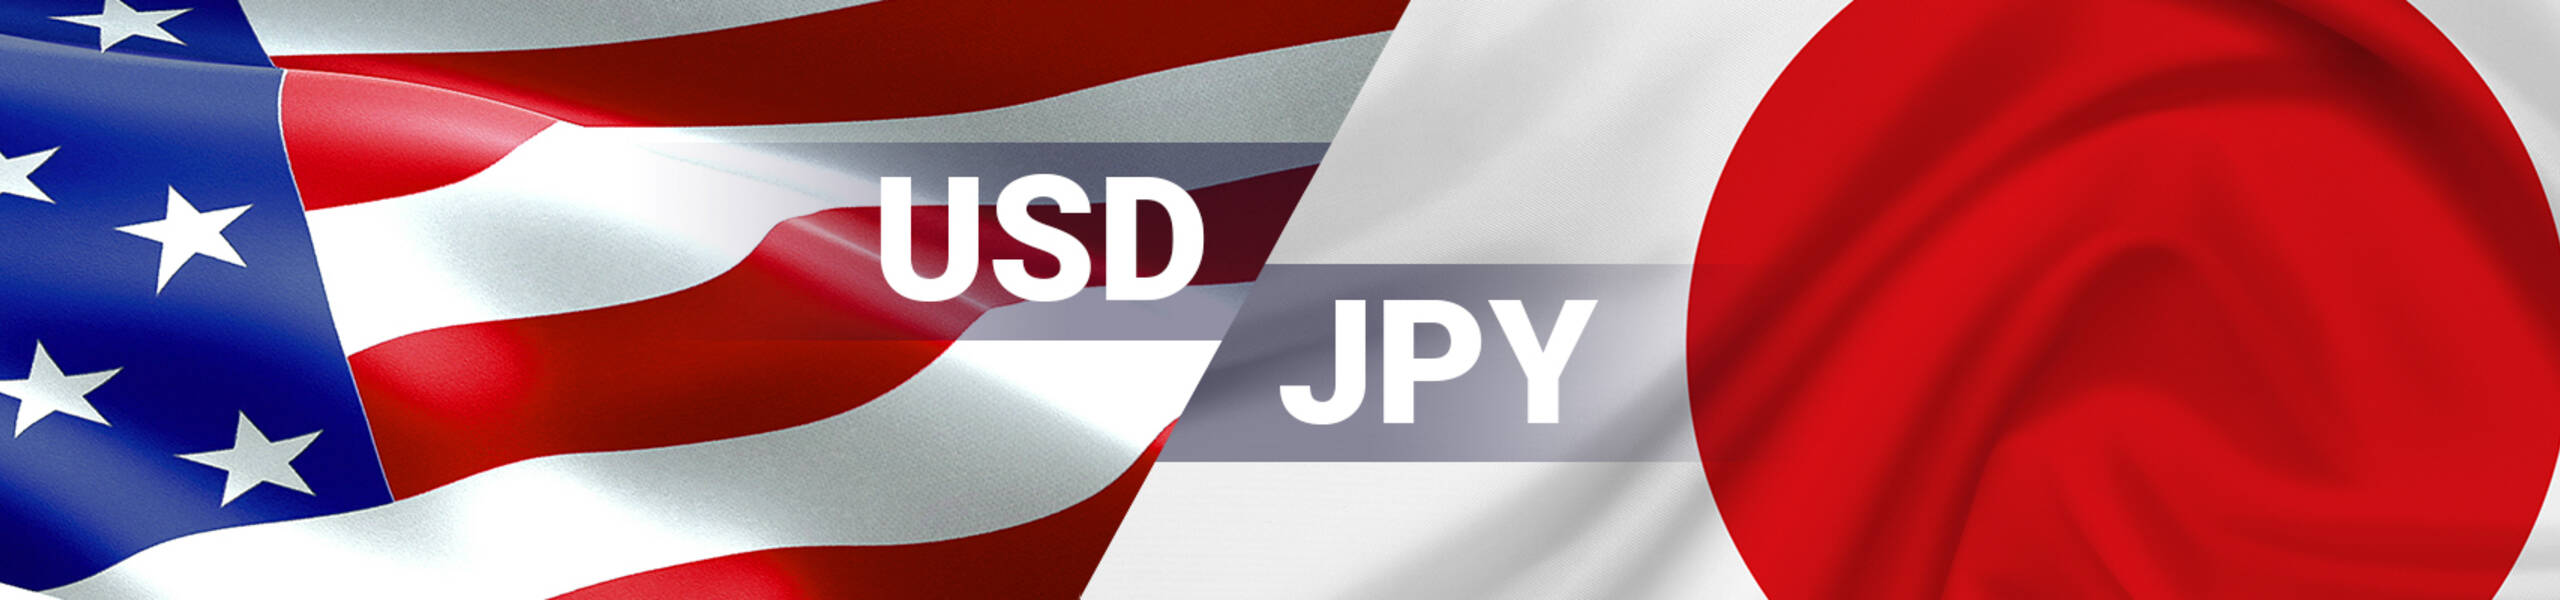 USD/JPY Dailyレポート 2017/11/14